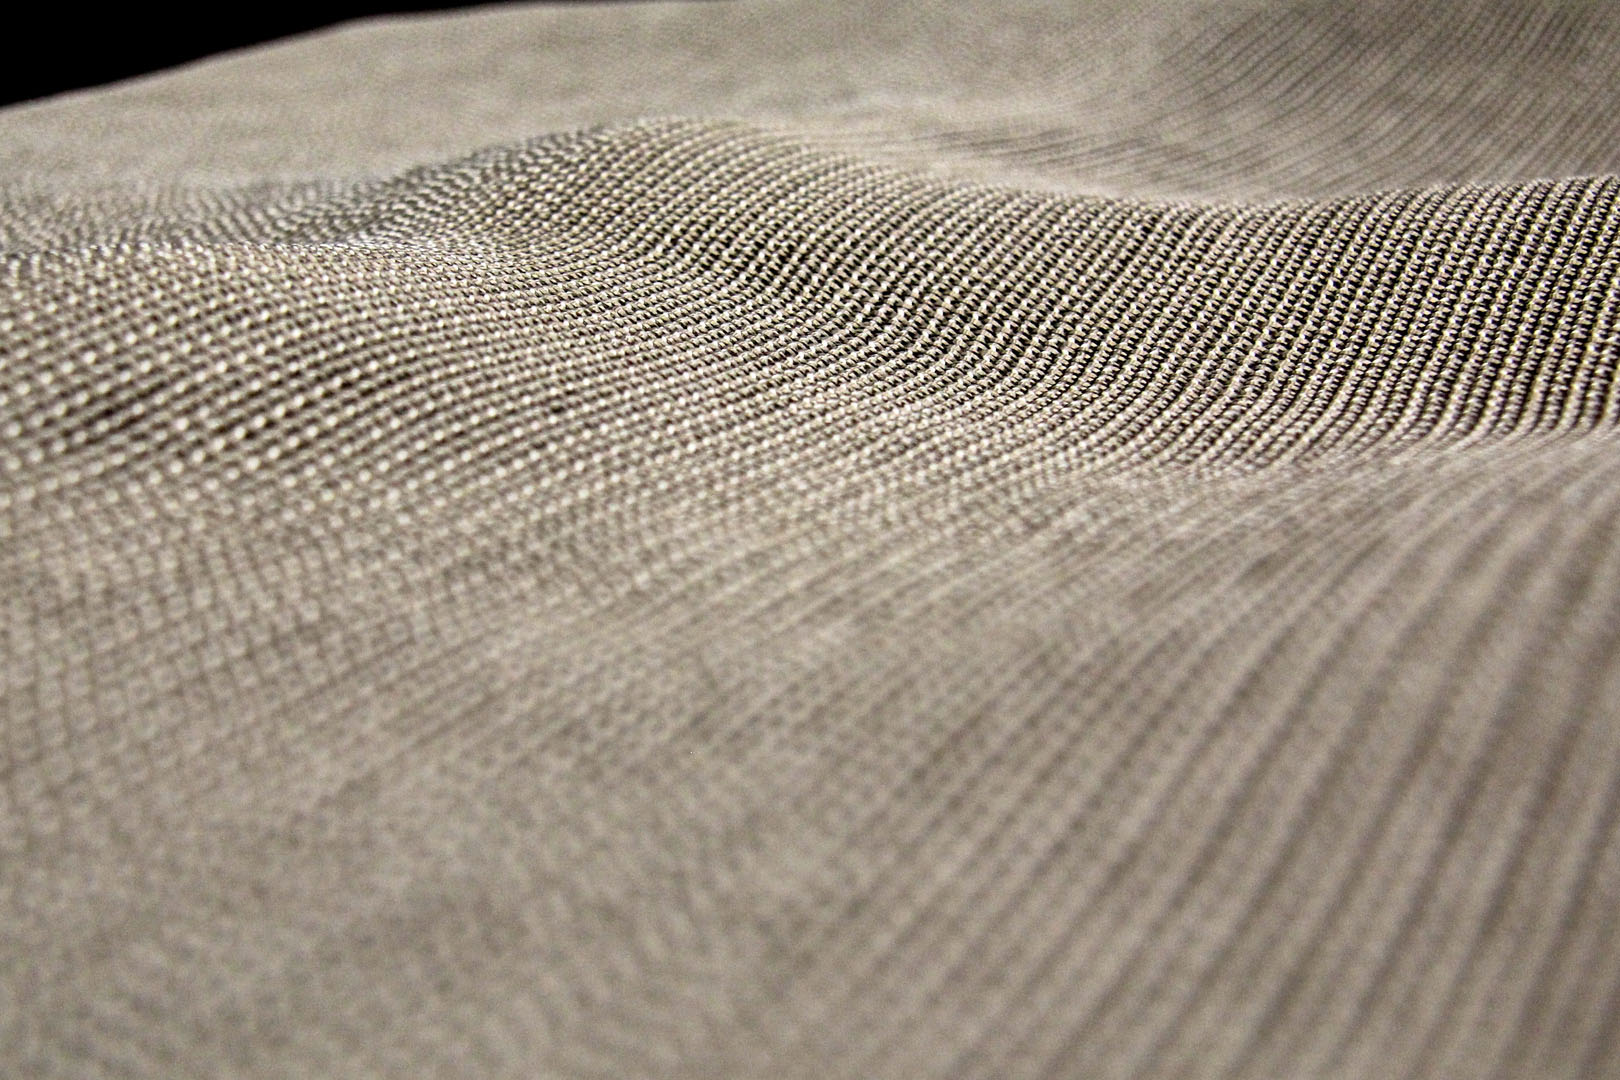 A close up of the fabric surface of a blanket.